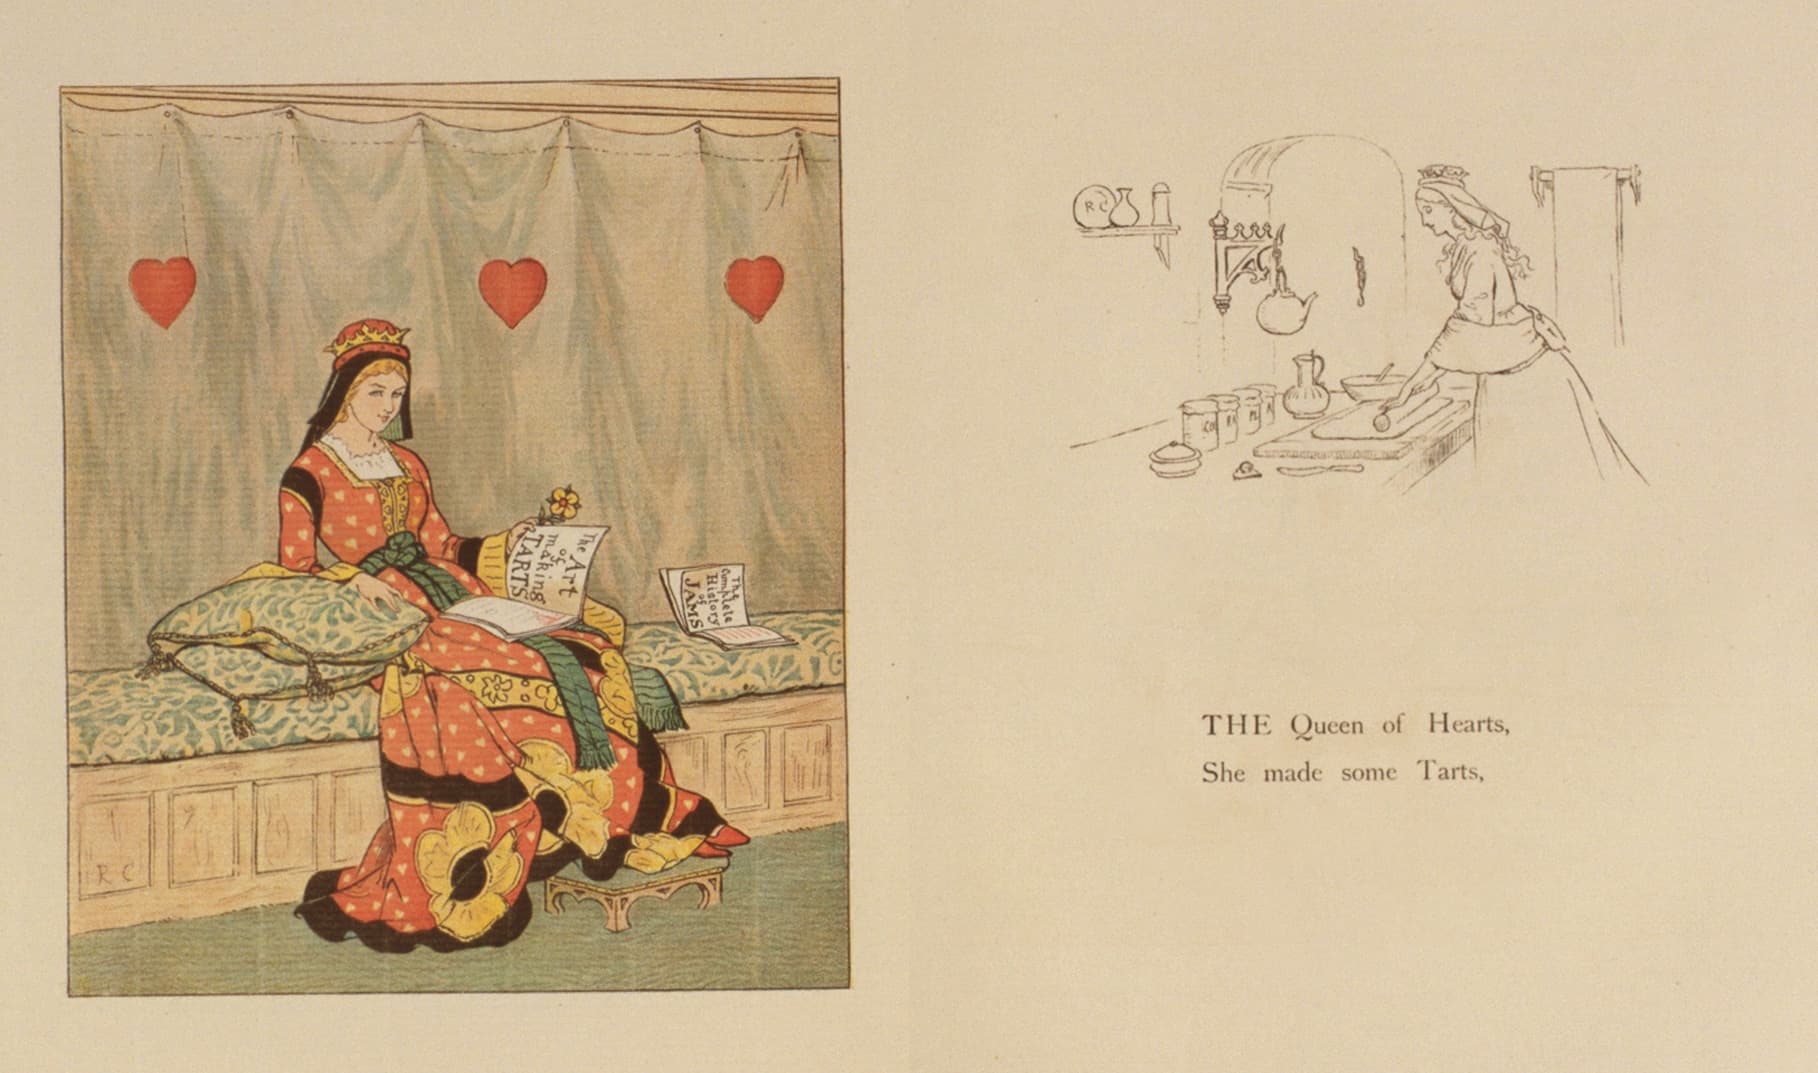 page 2-3 of The Queen of Hearts (page 222-223 of The Complete Collection of PICTURES and SONGS)